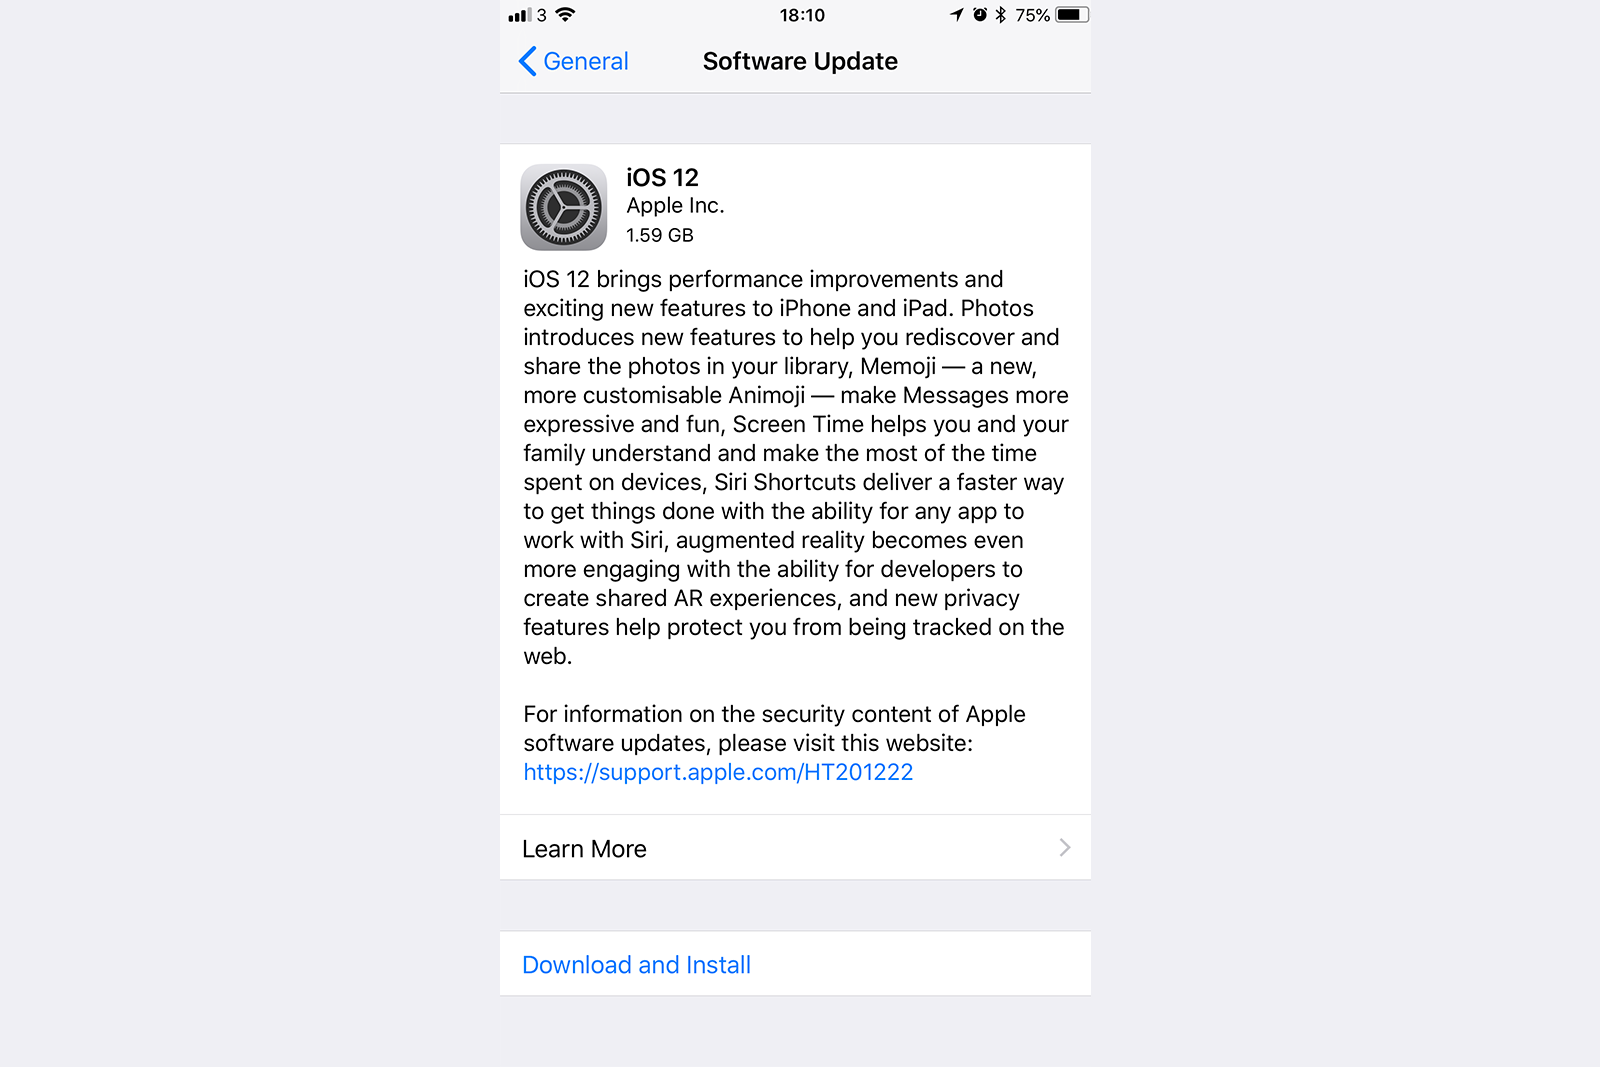 Its Here Apple Officially Releases Ios 12 For Iphone And Ipad Users image 2